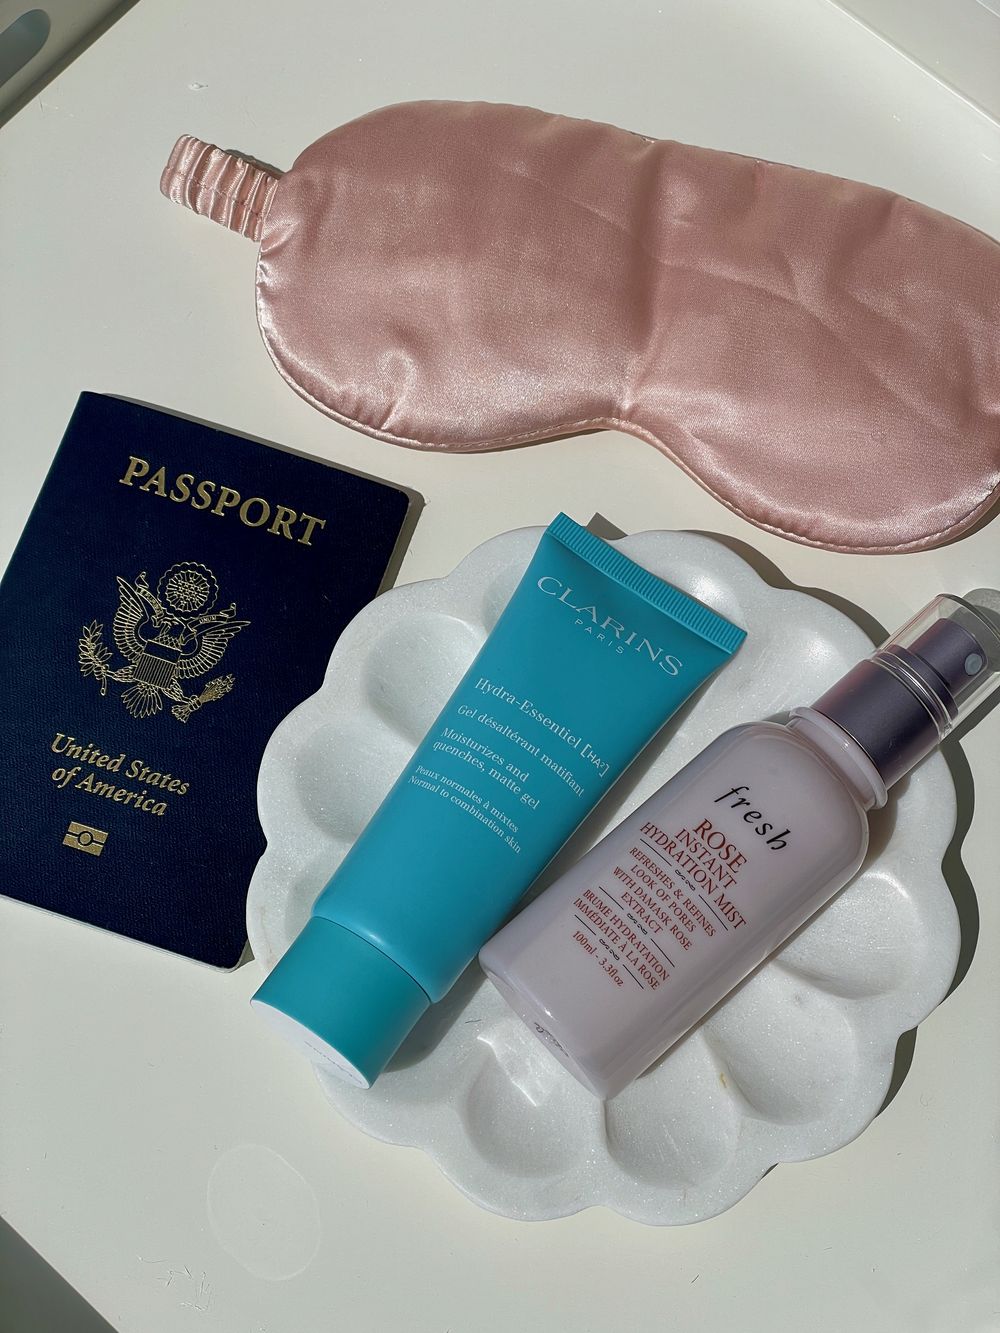 Overnight Flight Skincare like the French: Hydrate During Long Flights